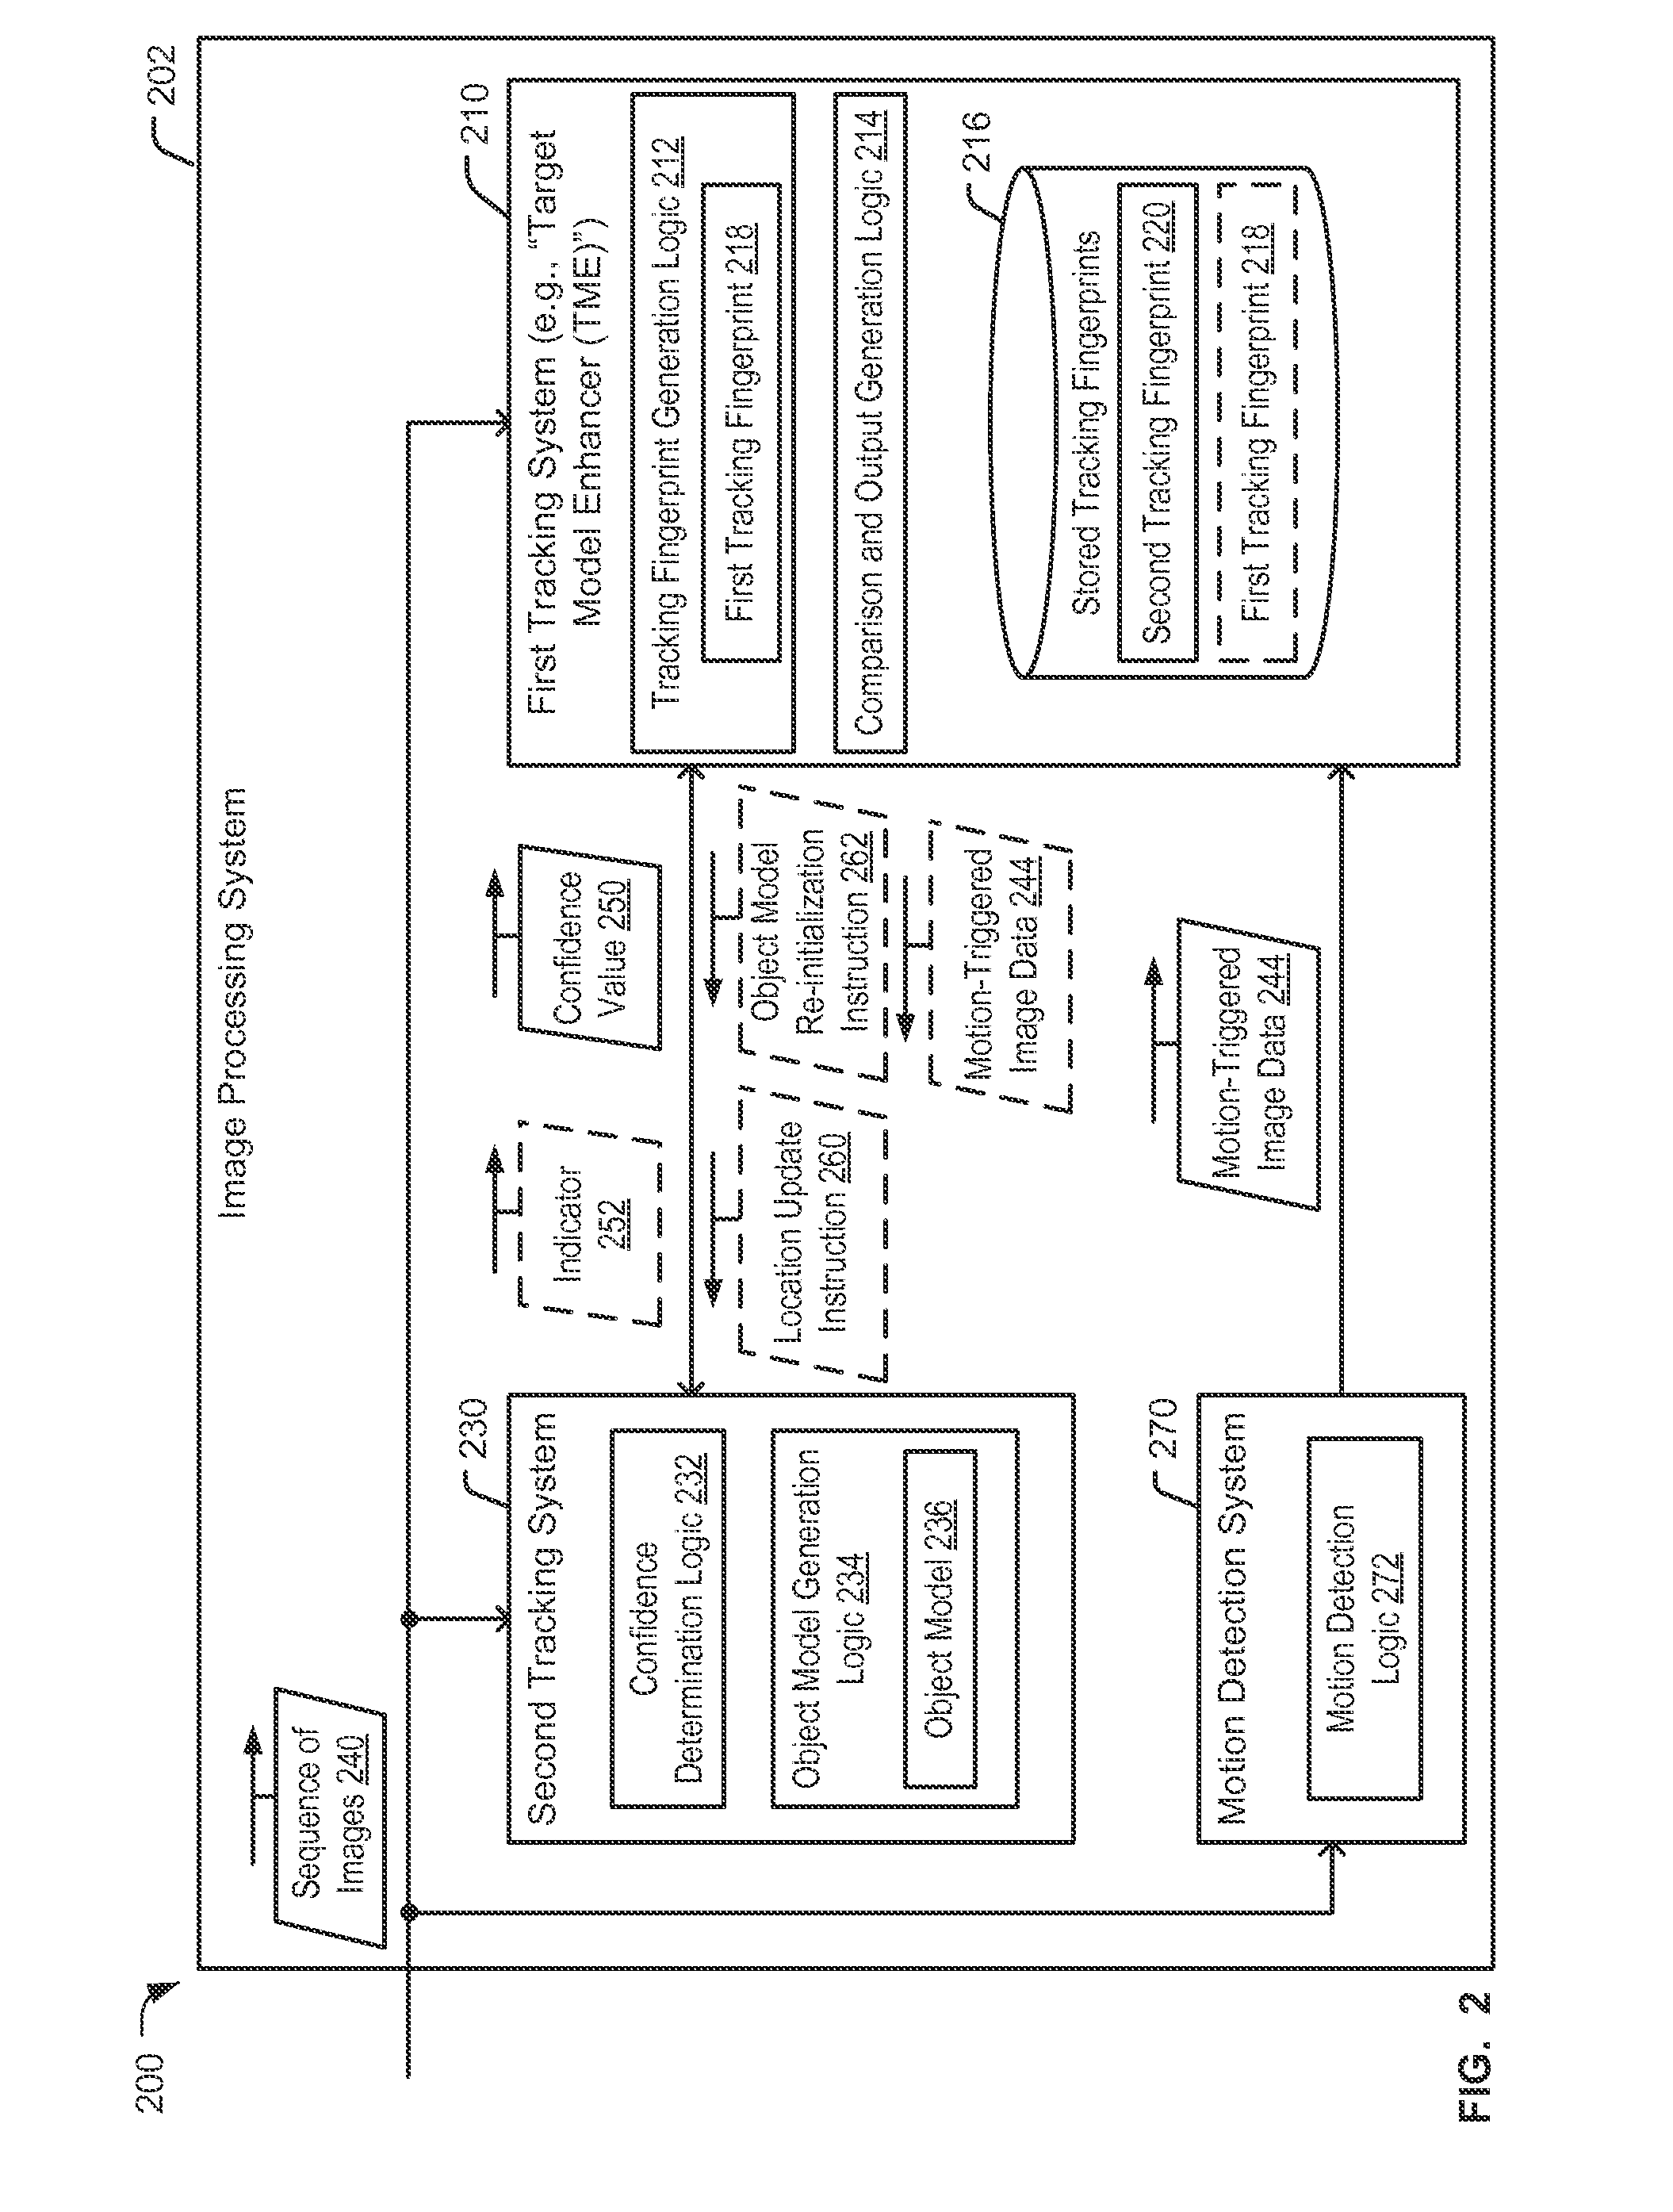 System and method to improve object tracking using tracking fingerprints